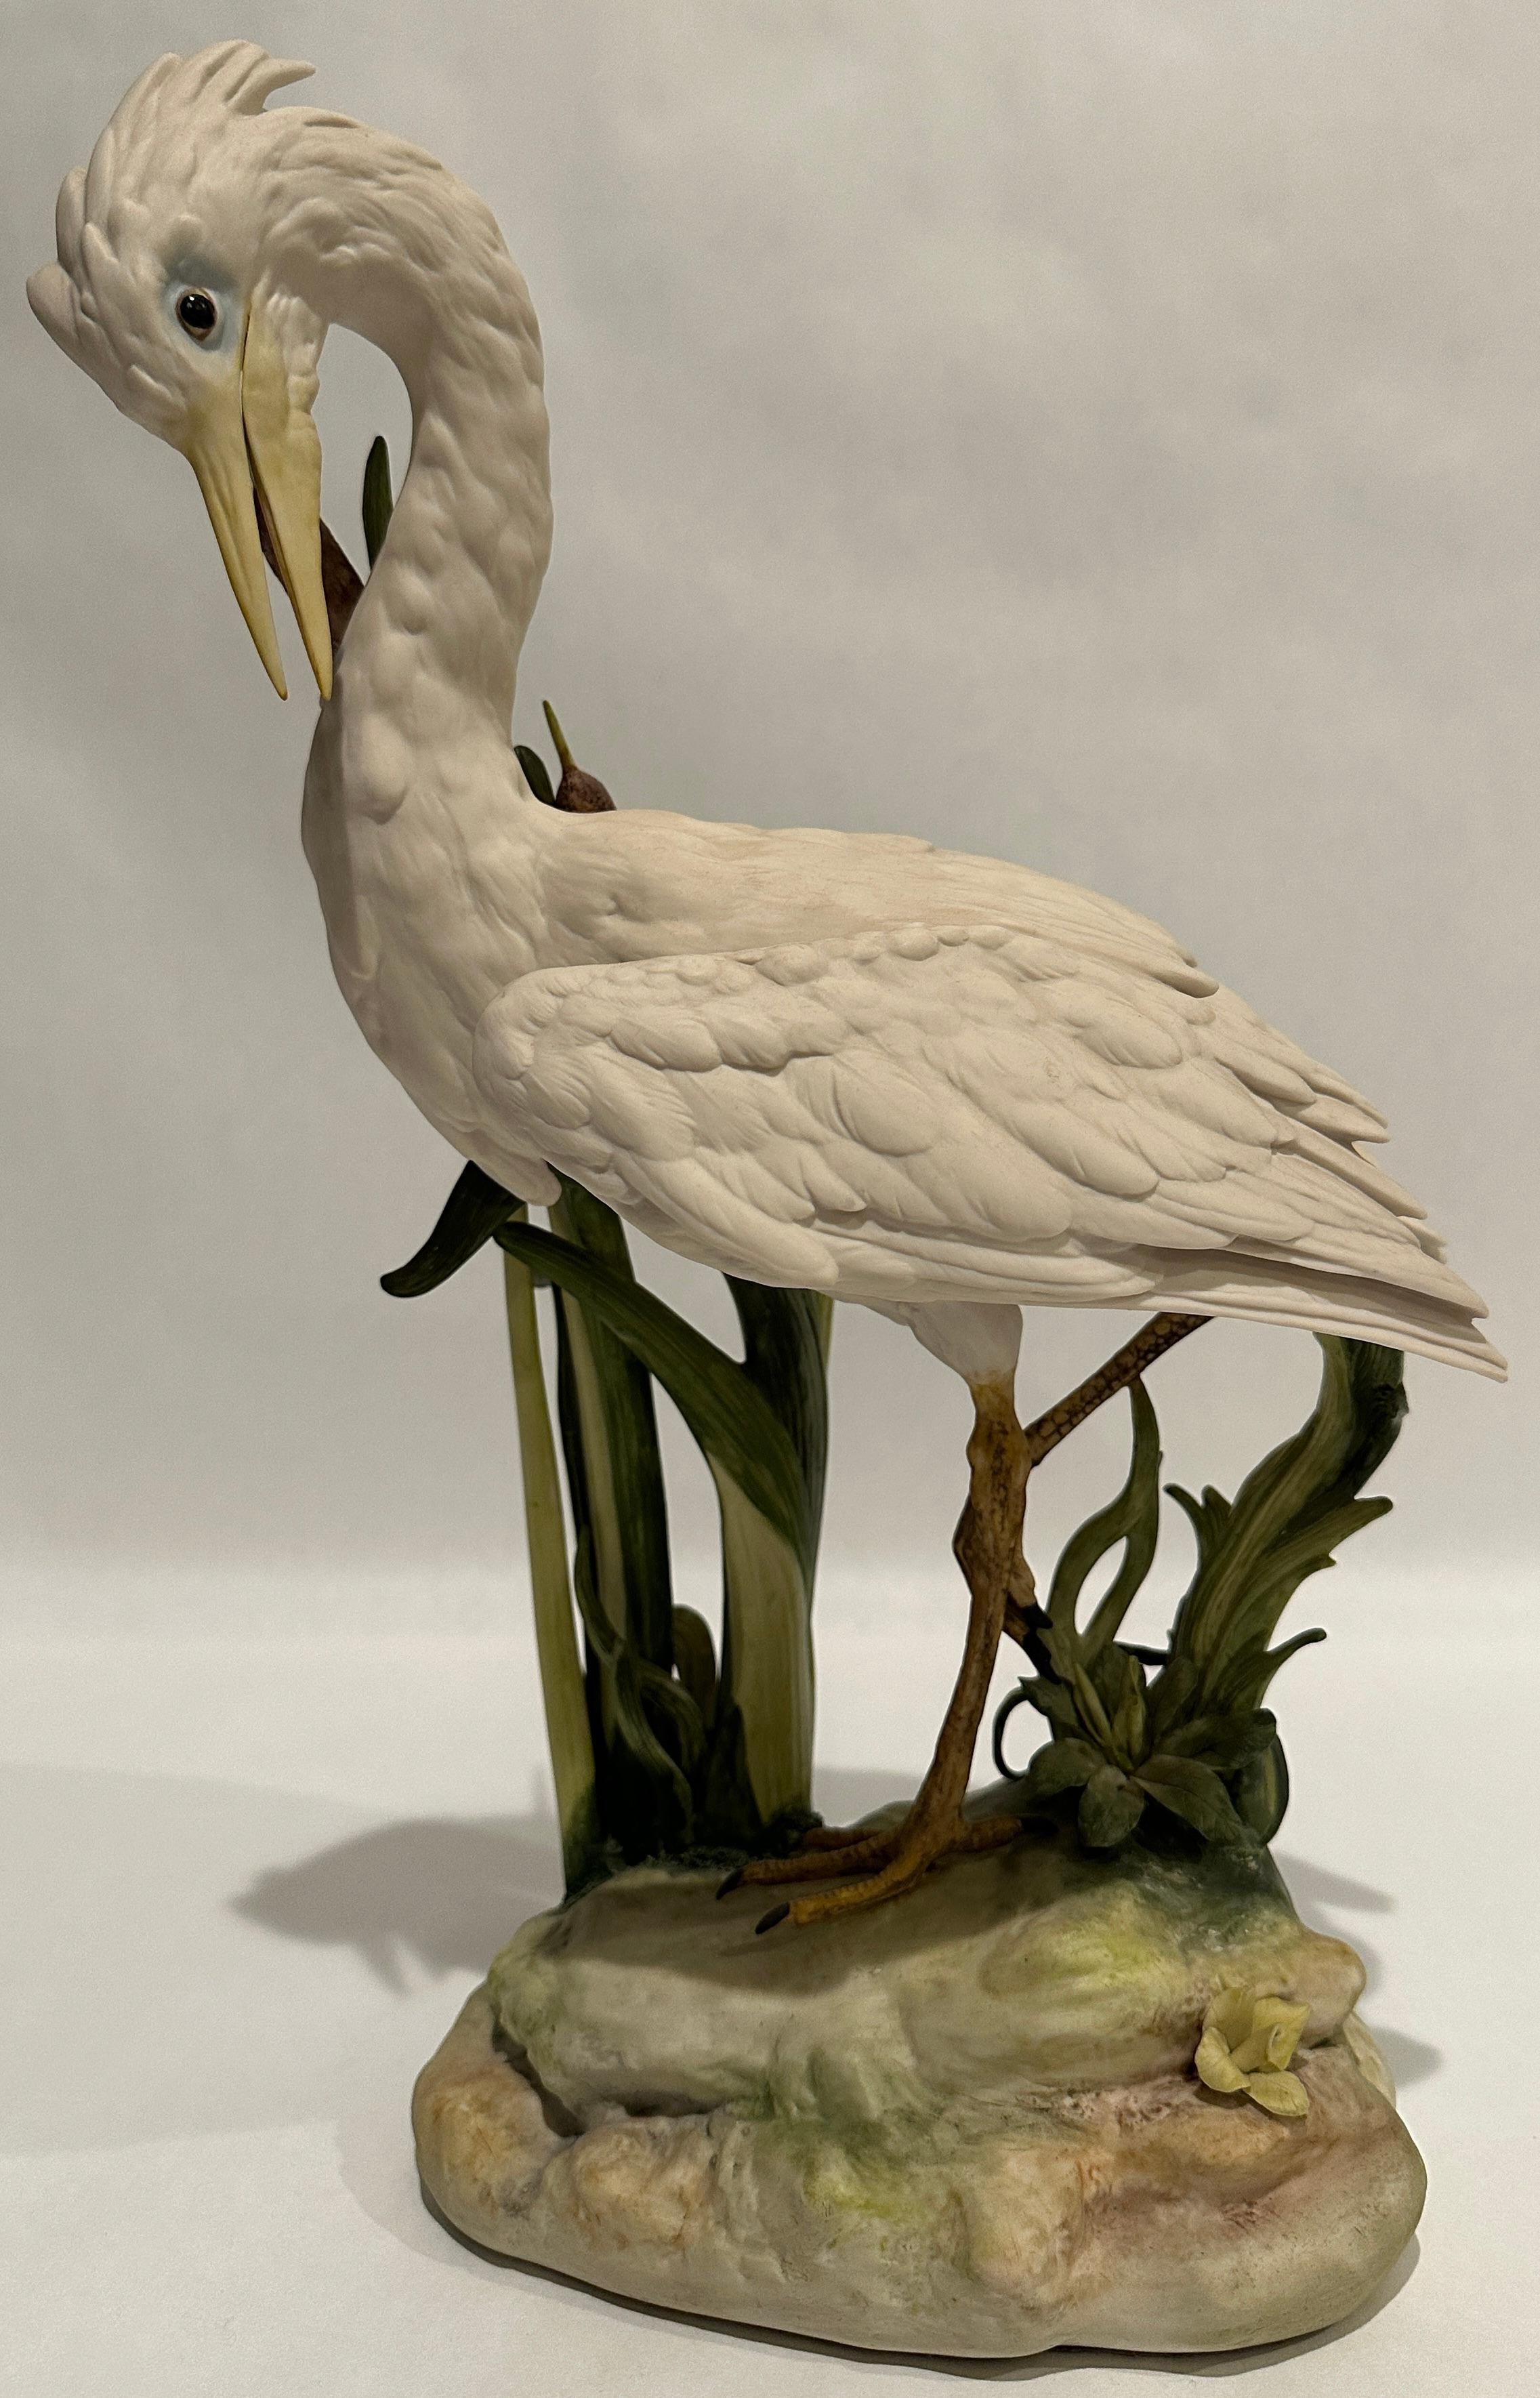 Here is the limited edition Great White Heron, posing at 19” high as an issue of 350. The 1979 Cybis catalog gives its issue year as 1964, although Cybis in Retrospect shows it as 1965; the edition was completed in 1973. The so-called “Great White